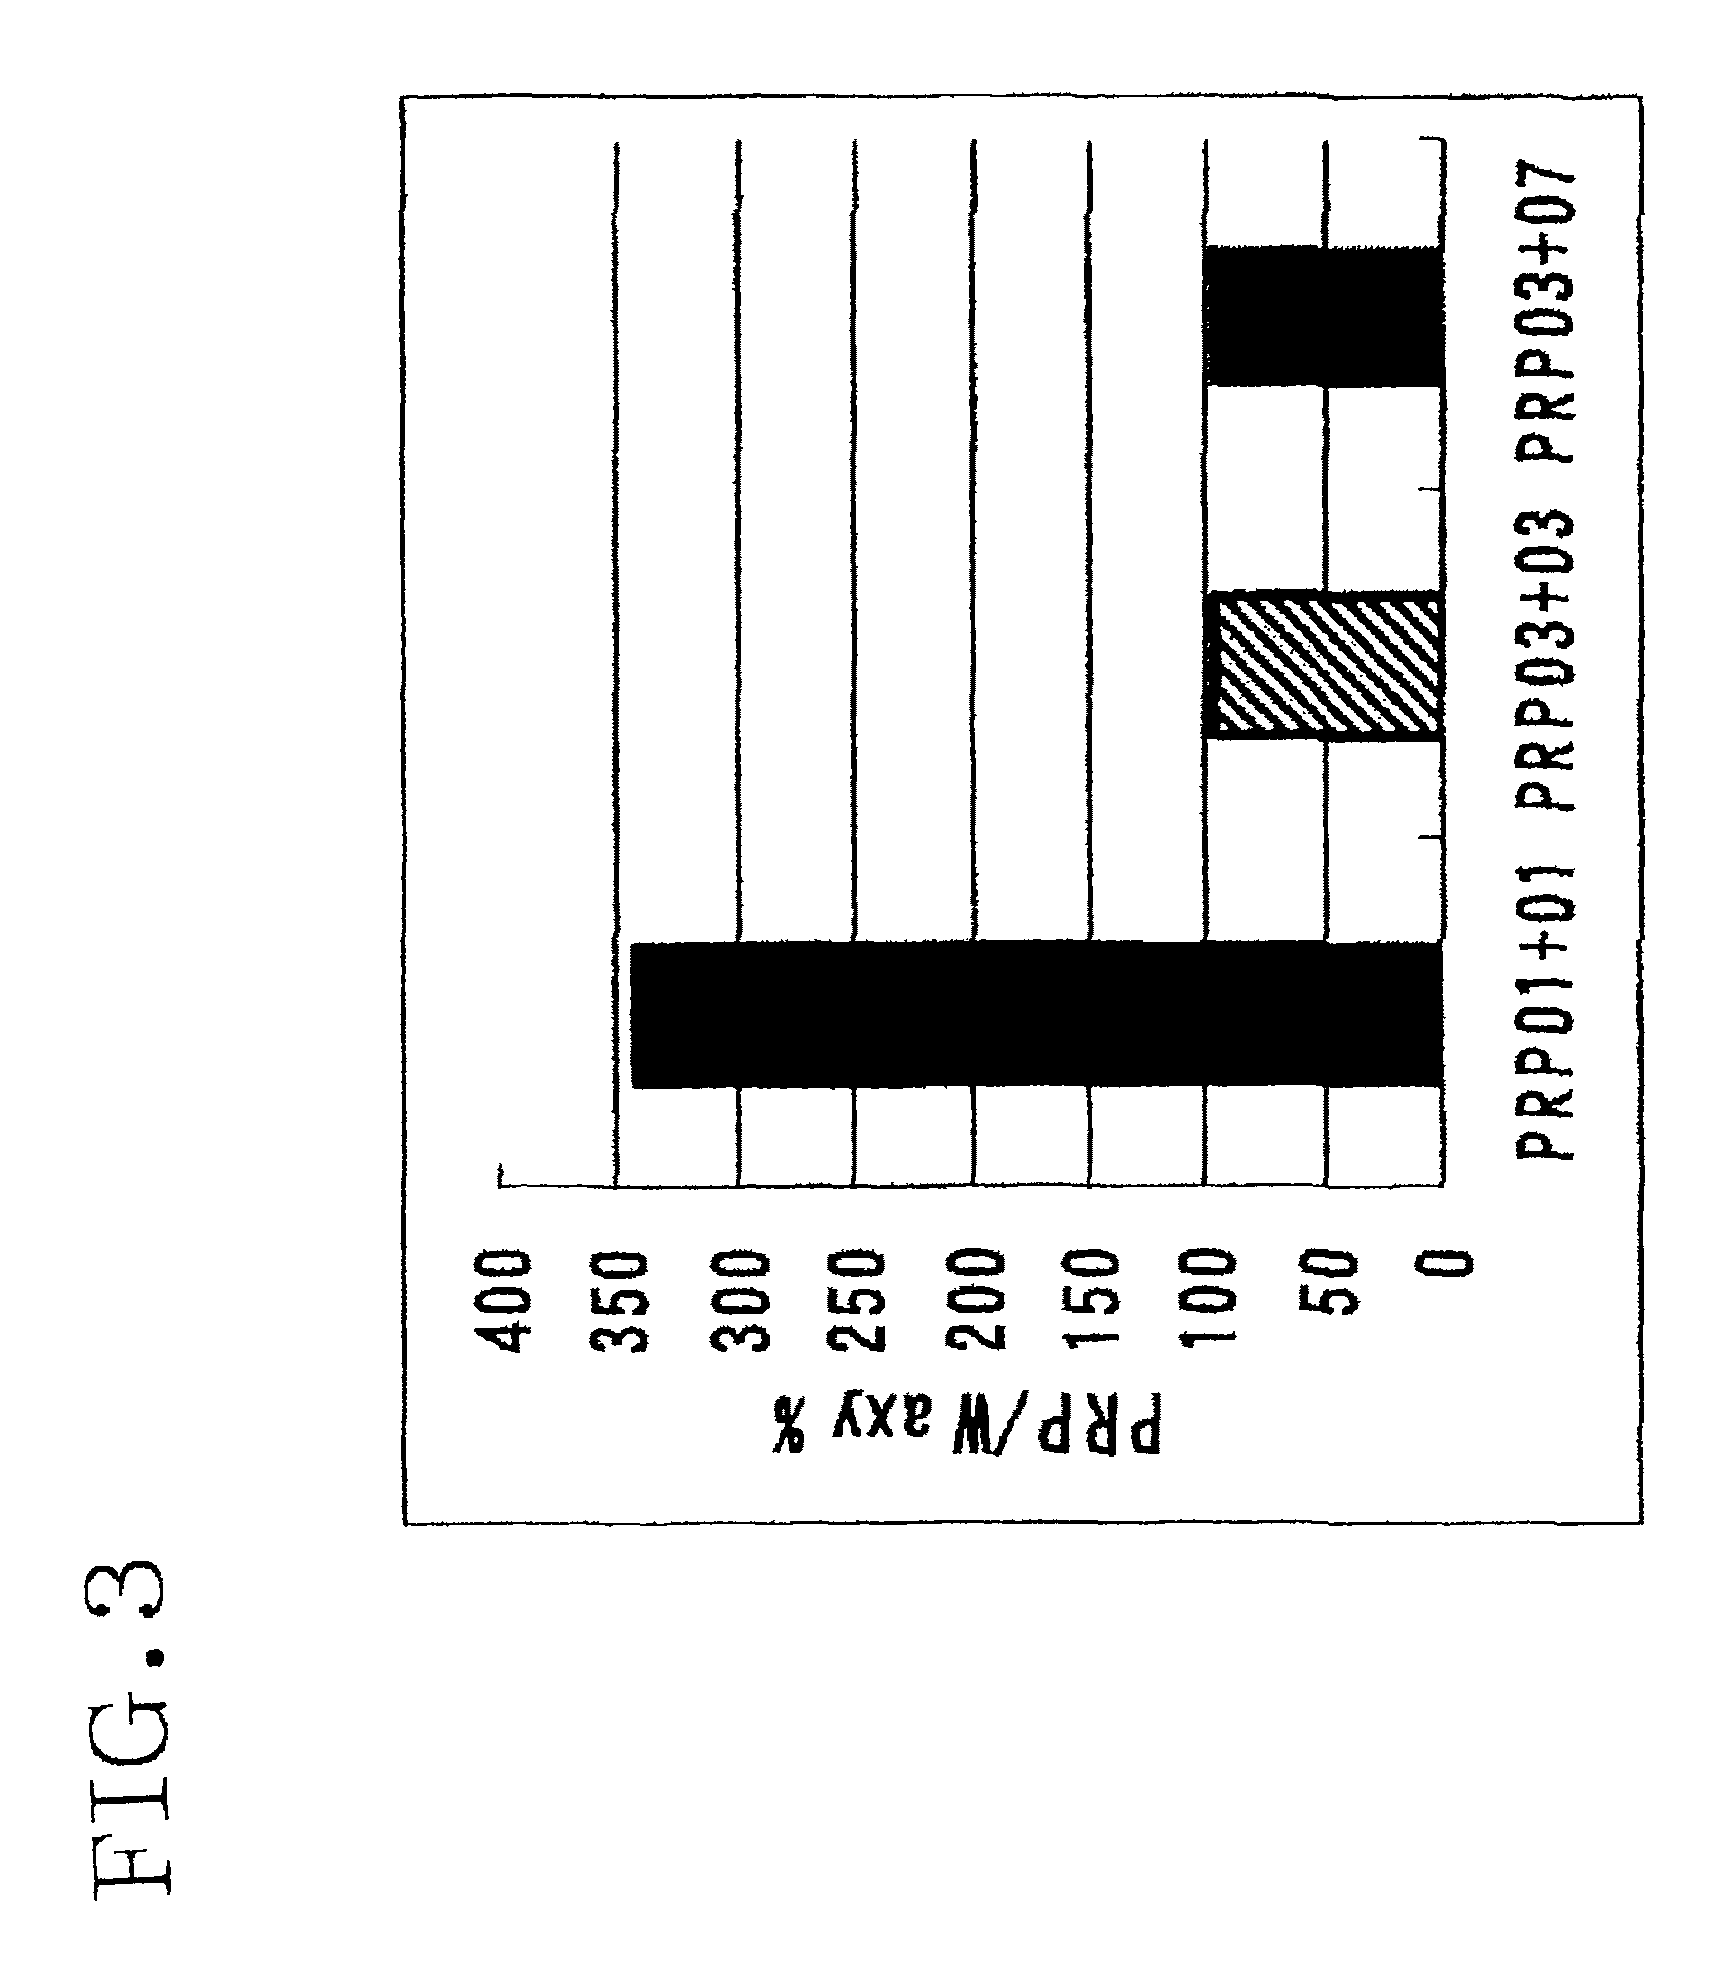 Method of detecting or quantitating endogenous wheat DNA and method of determining contamination rate of genetically modified wheat in test sample